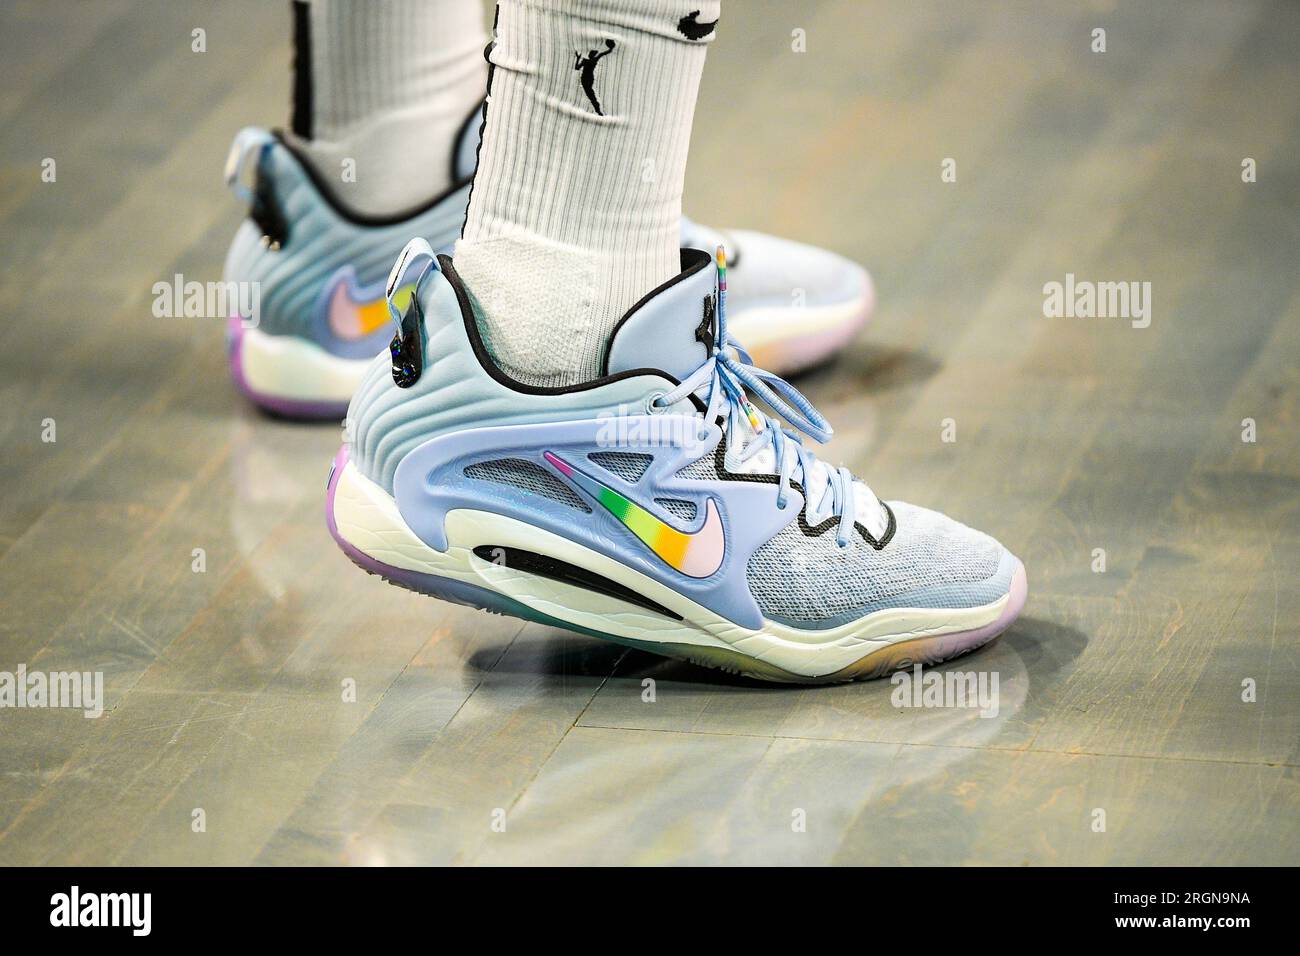 BROOKLYN, NY - AUGUST 06: A general view of the Nike basketball shoes worn  by New York Liberty forward Jonquel Jones (35) during a WNBA game between  the Las Vegas Aces and